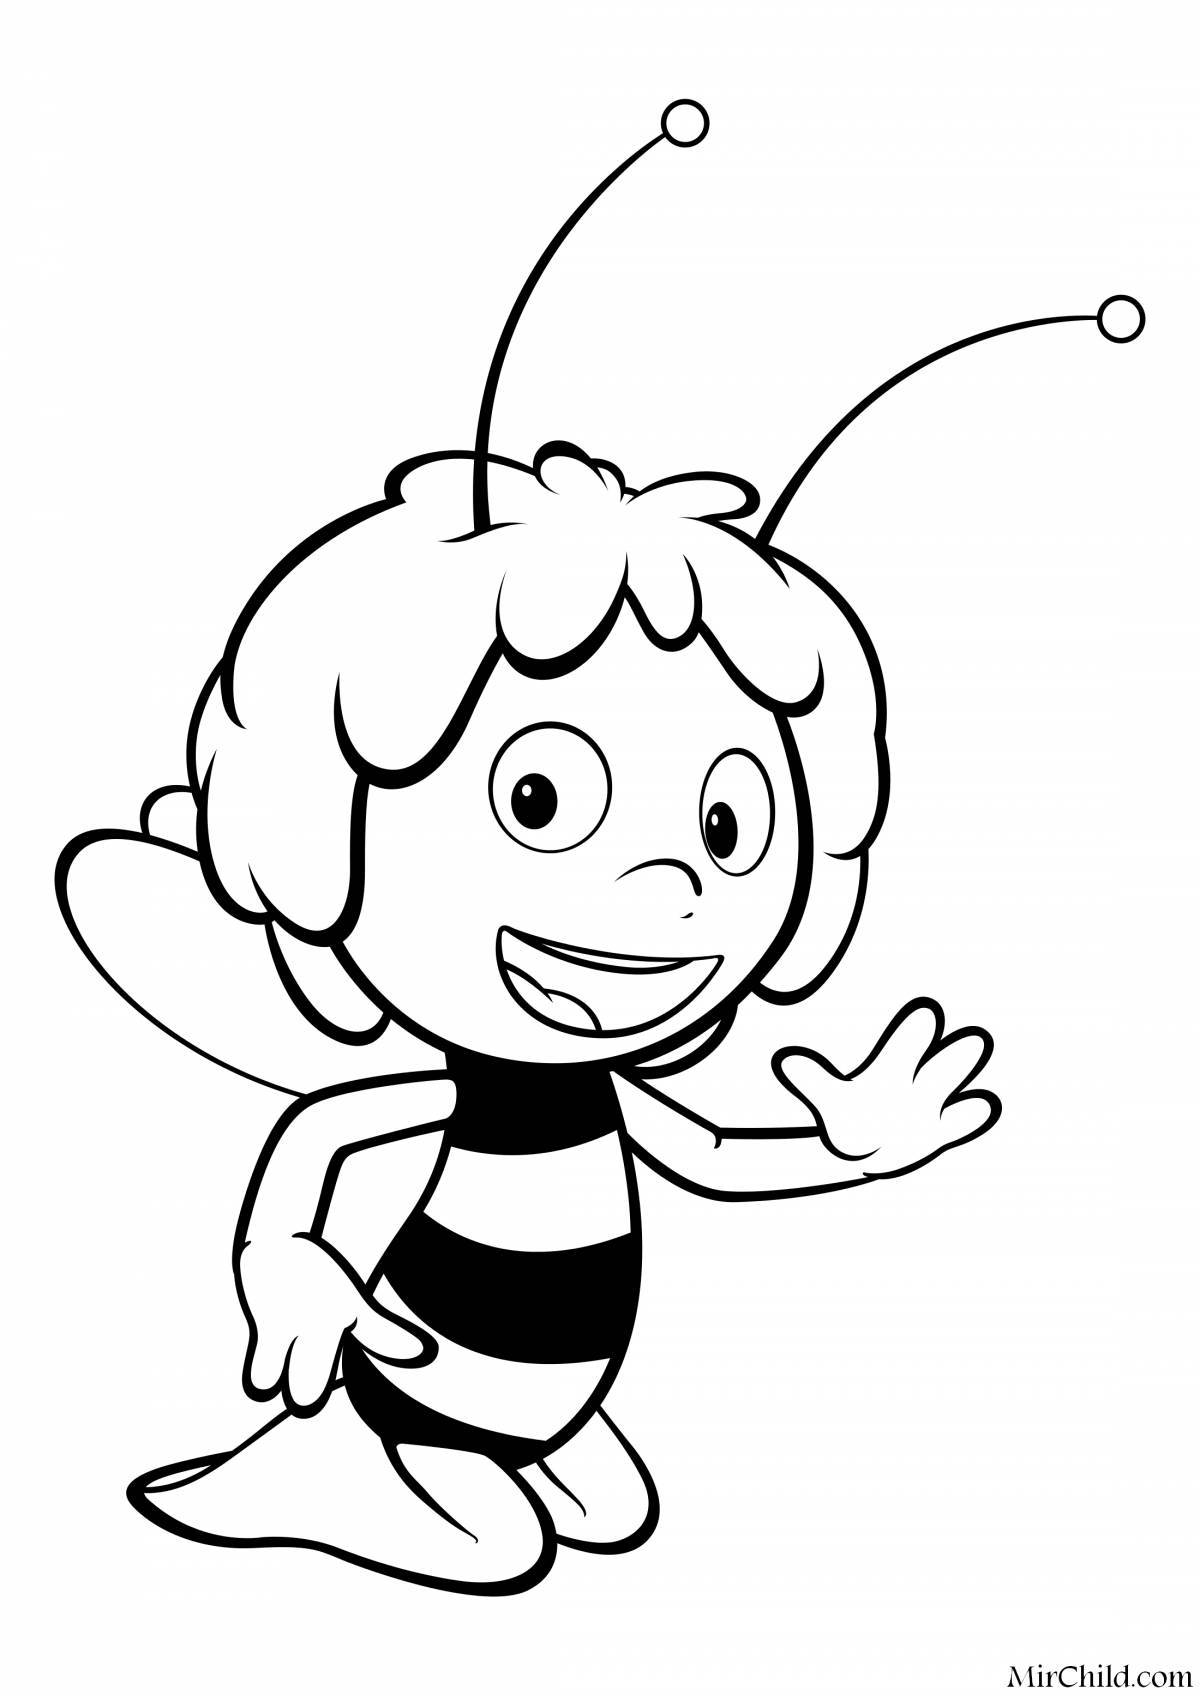 Colorful bee coloring page